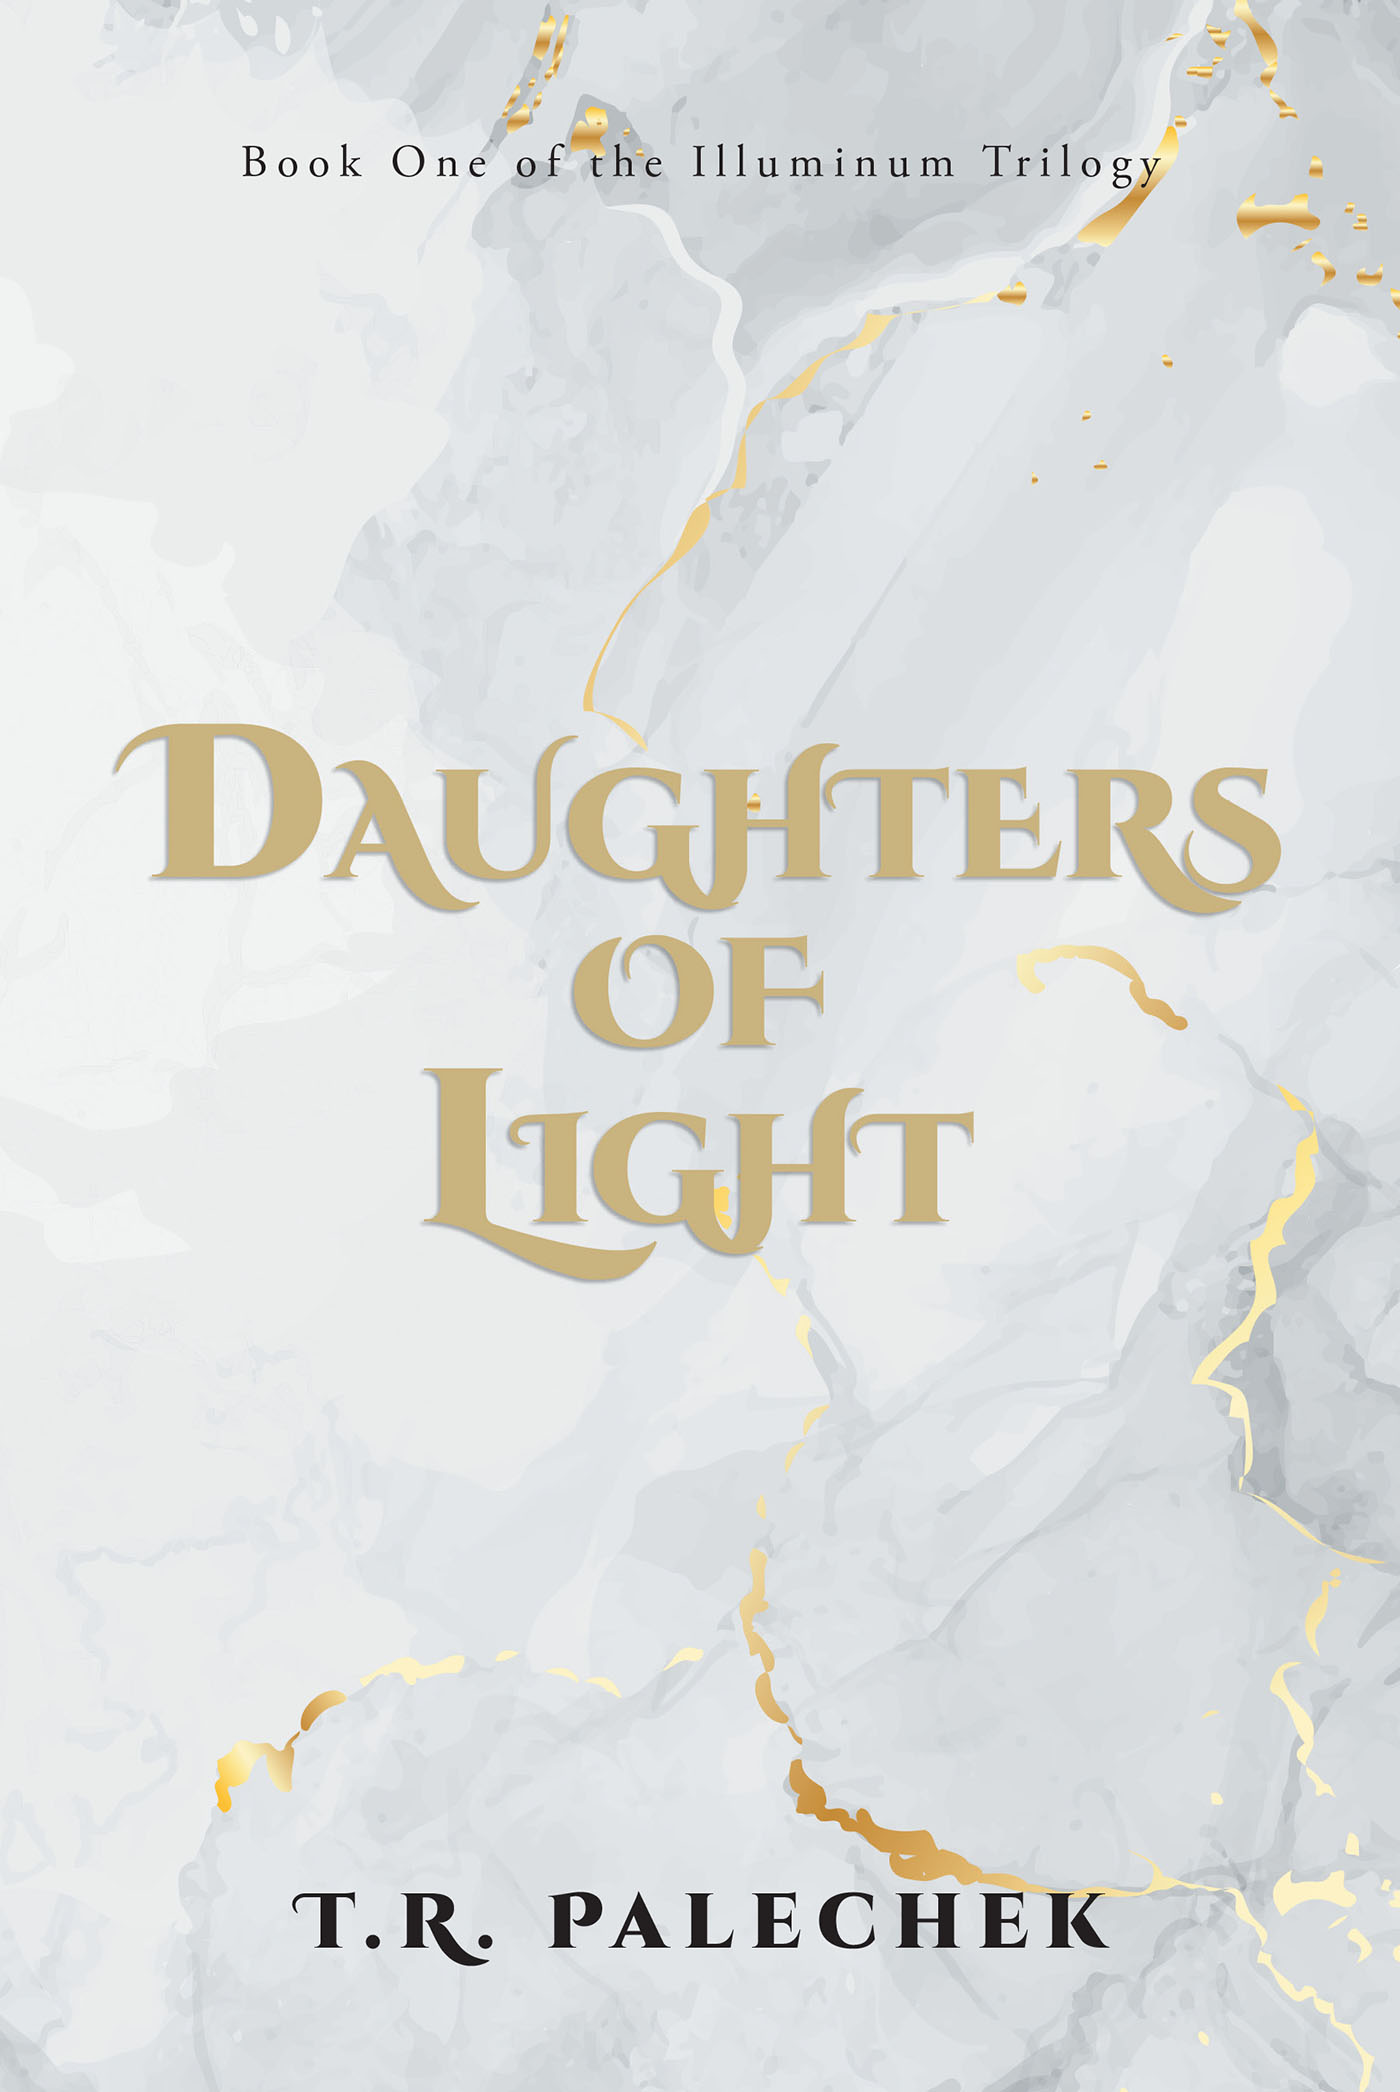 T. R. Palechek’s New Book, "Daughters of Light: Book One of the Illuminum Trilogy," Follows a Young Woman Whose World Begins to Slip as She Searches for the Truth